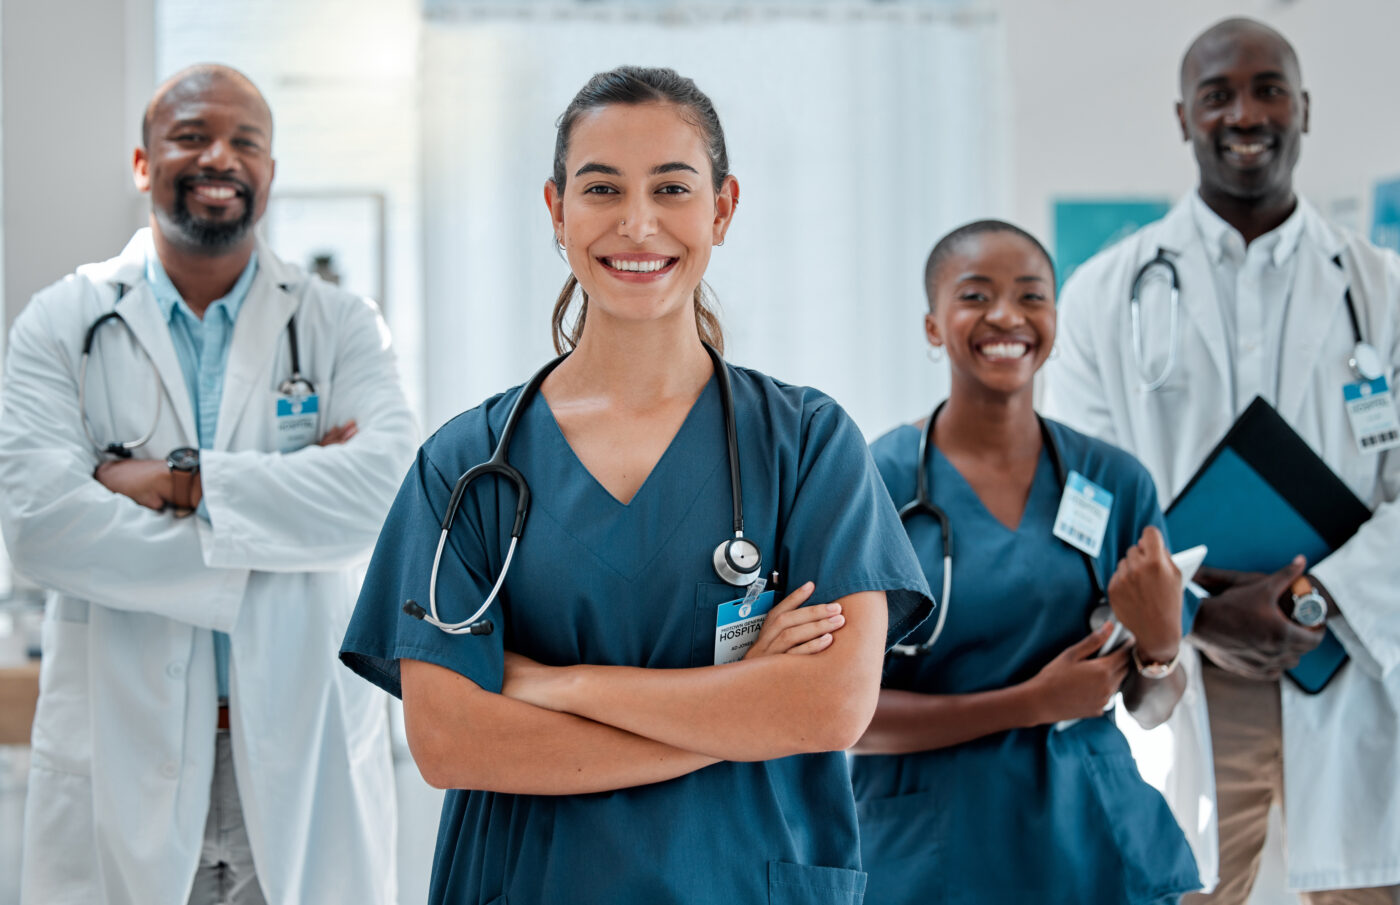 4 Good Clinical Goals For Every Nursing Student